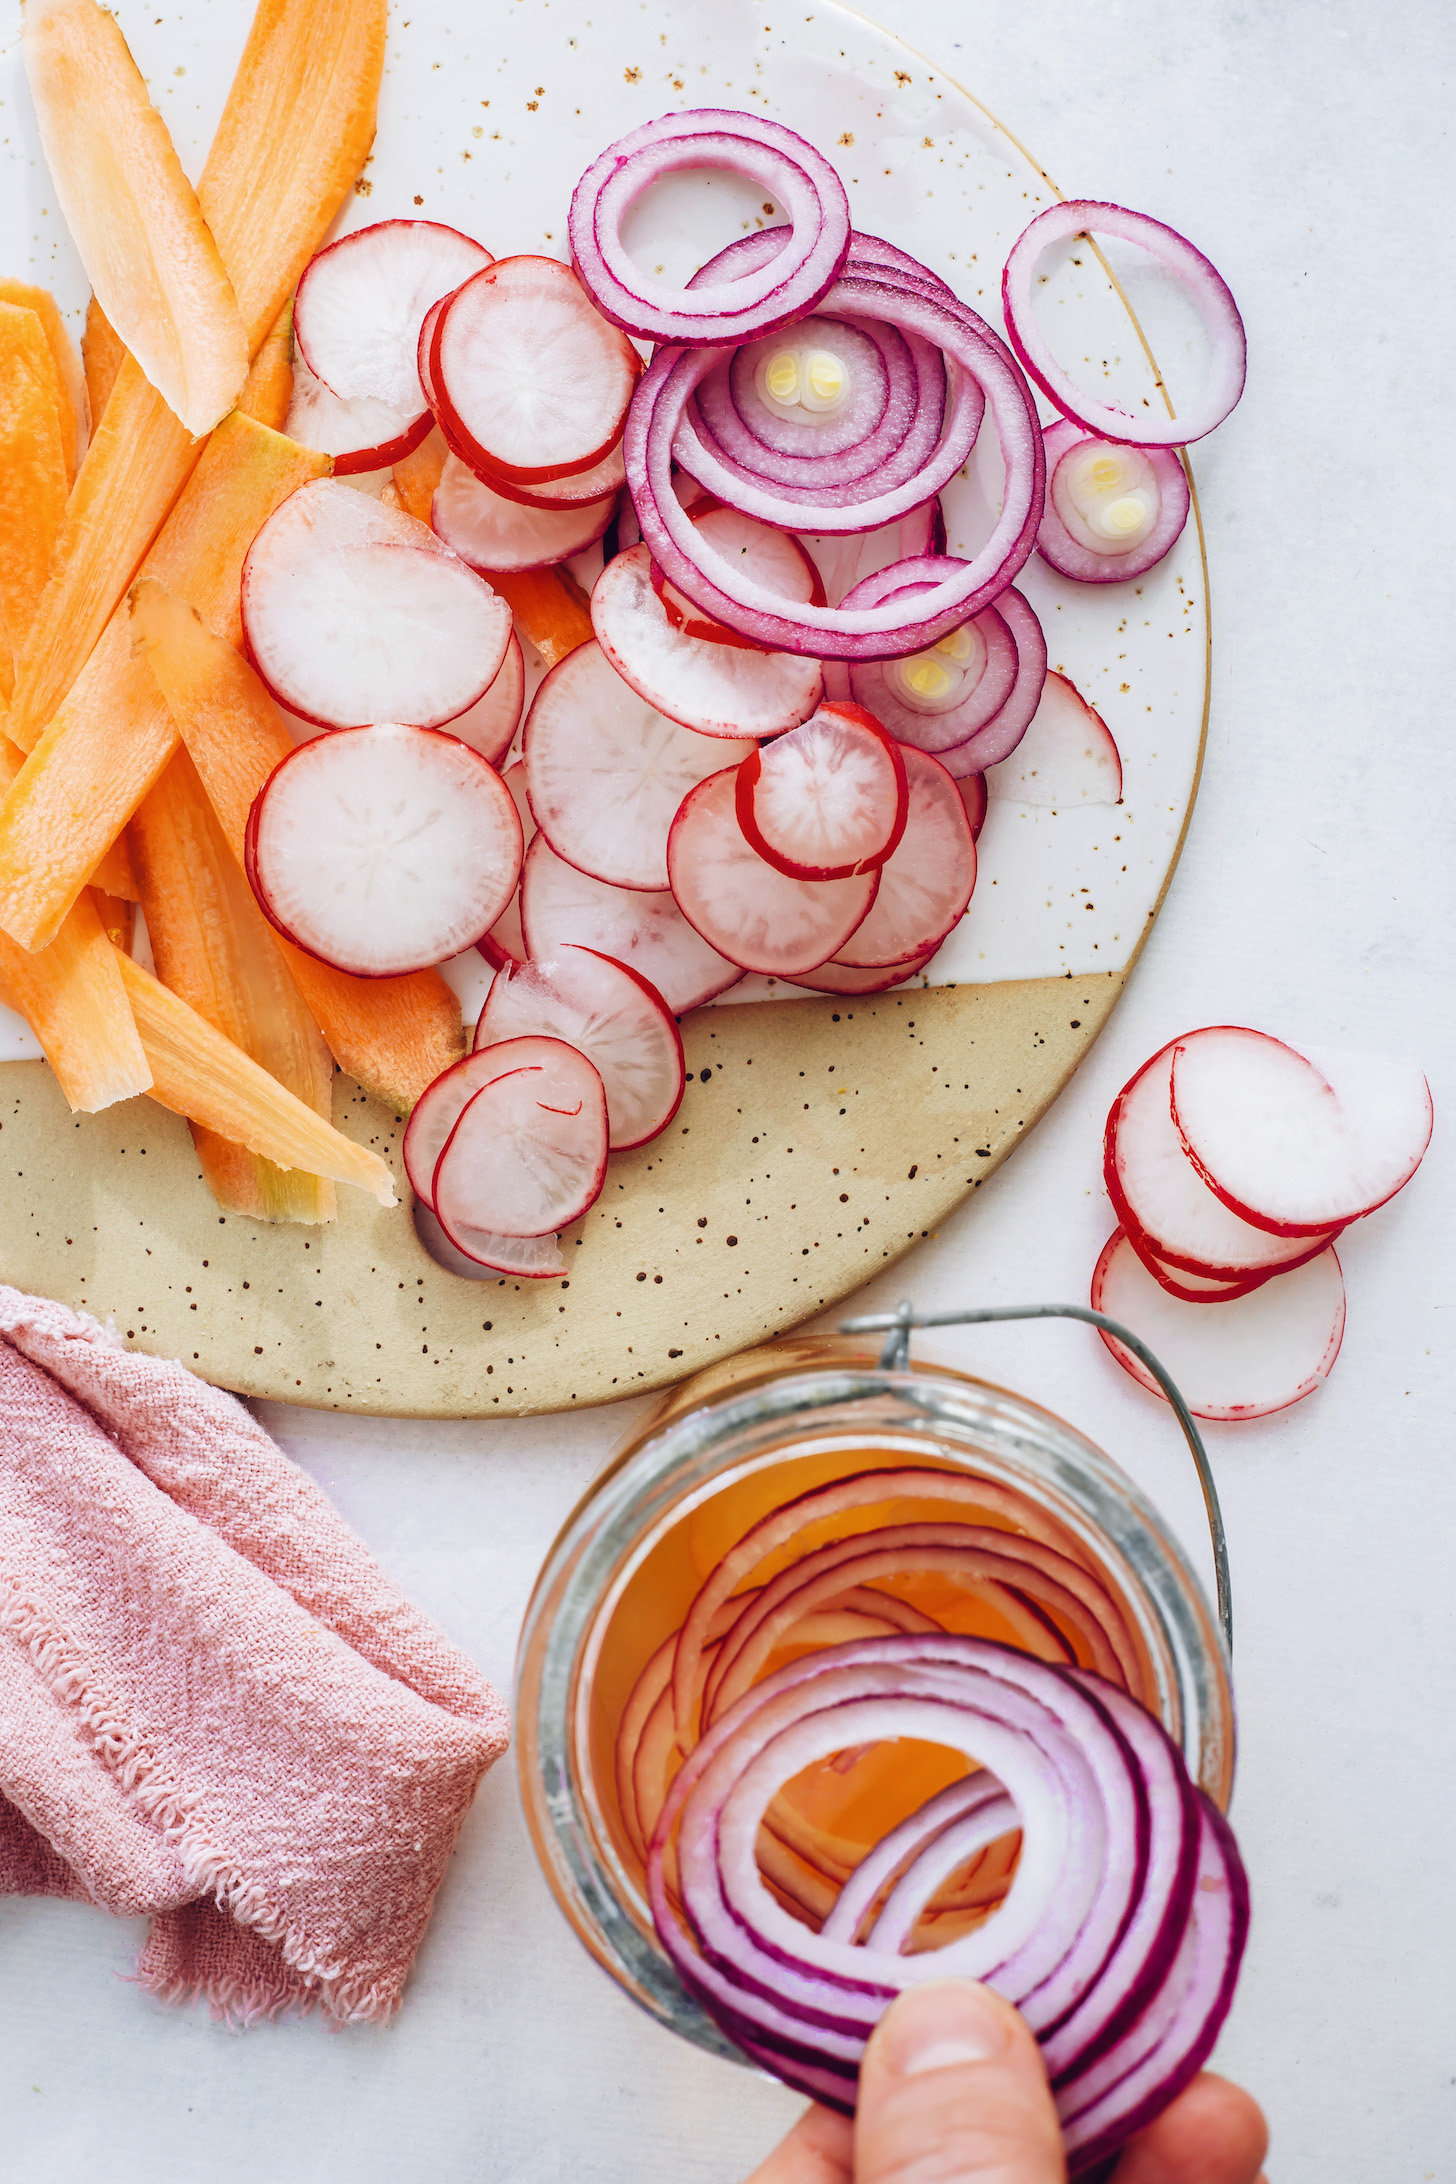 Placing red onion in a jar to make quick pickled vegetables